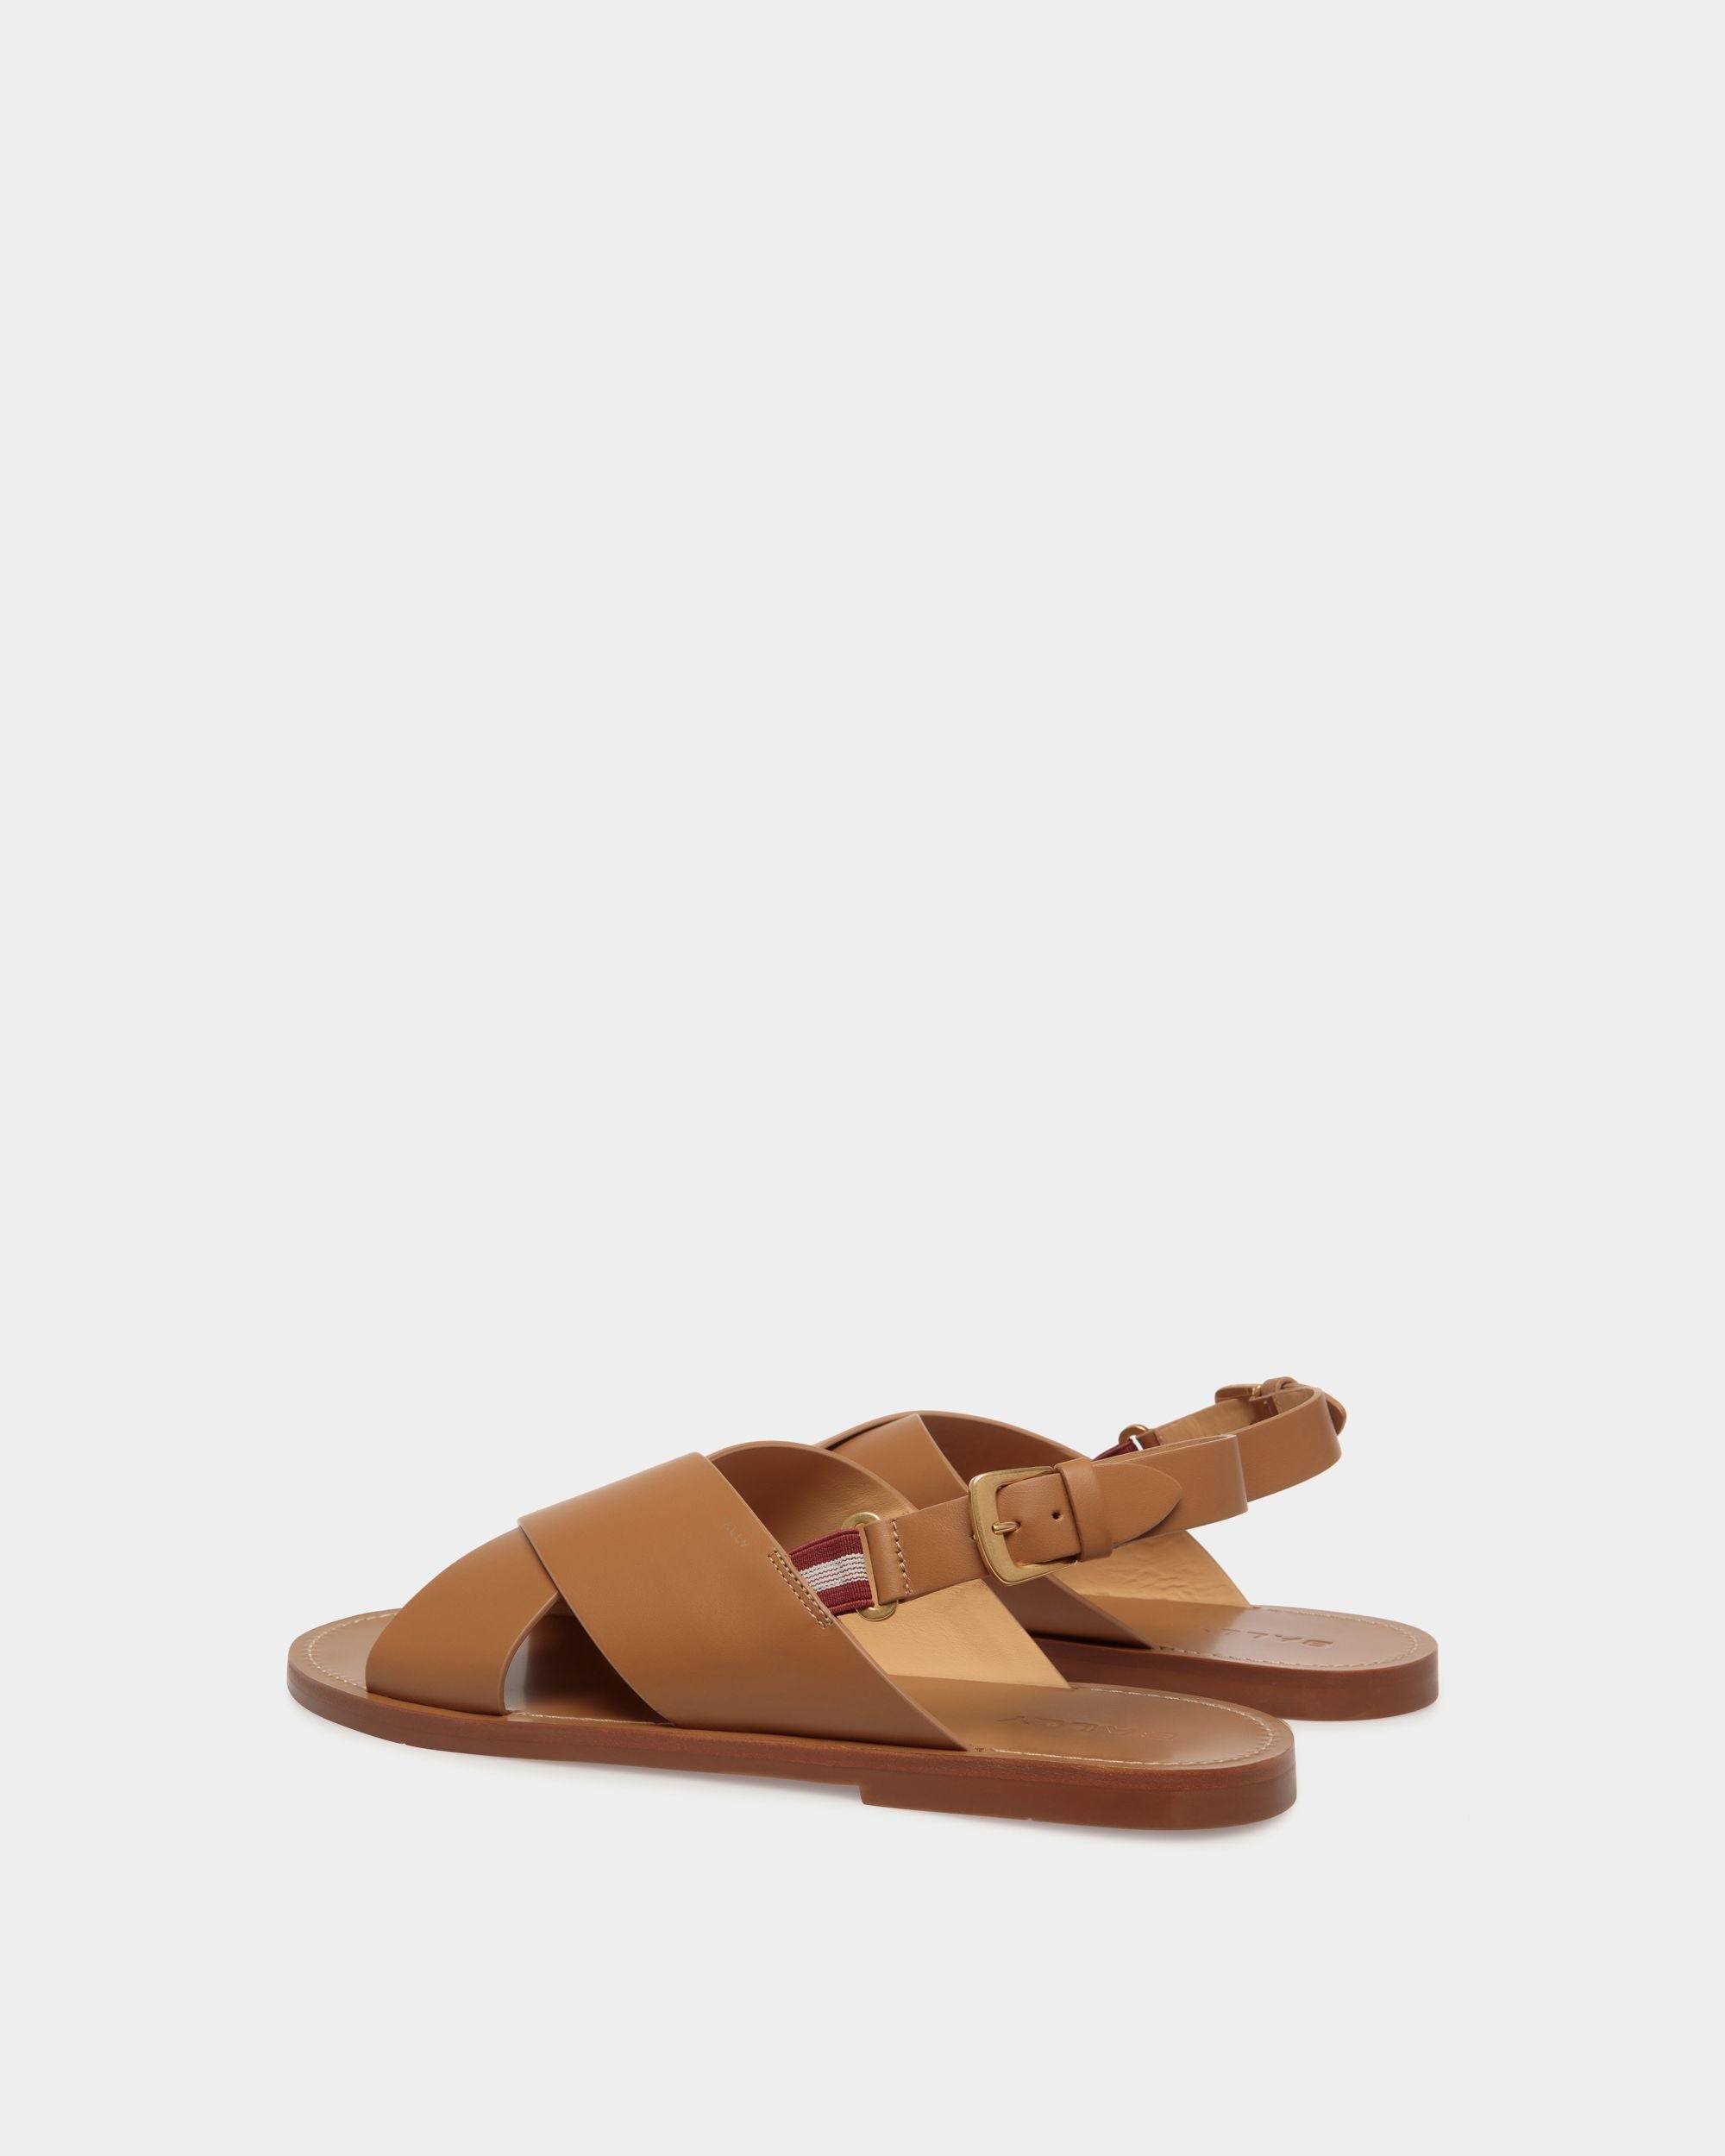 Chateau Sandal in Brown Leather - Men's - Bally - 04